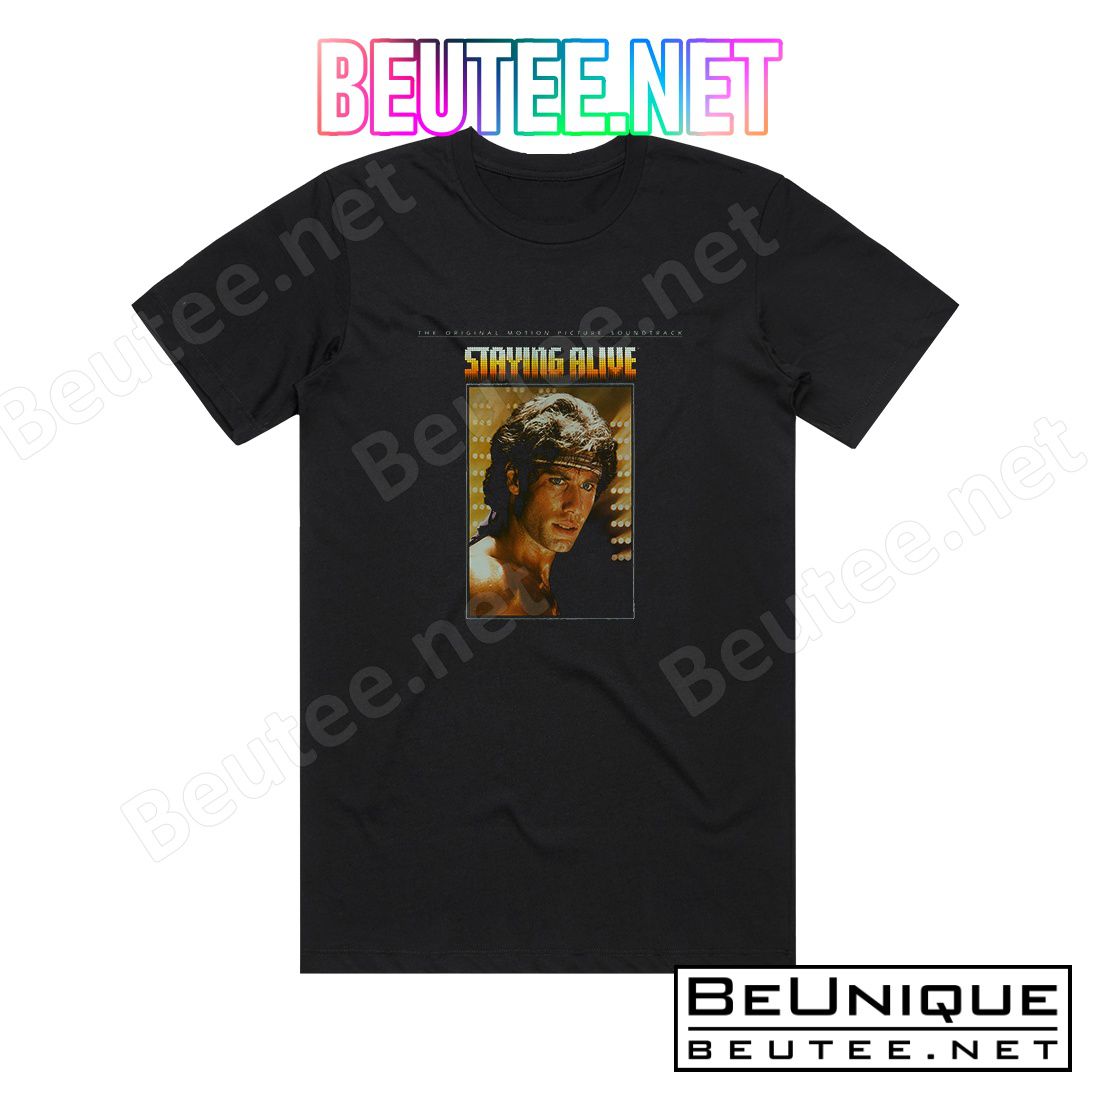 Bee Gees The Original Motion Picture Soundtrack  Staying Alive Album Cover T-Shirt